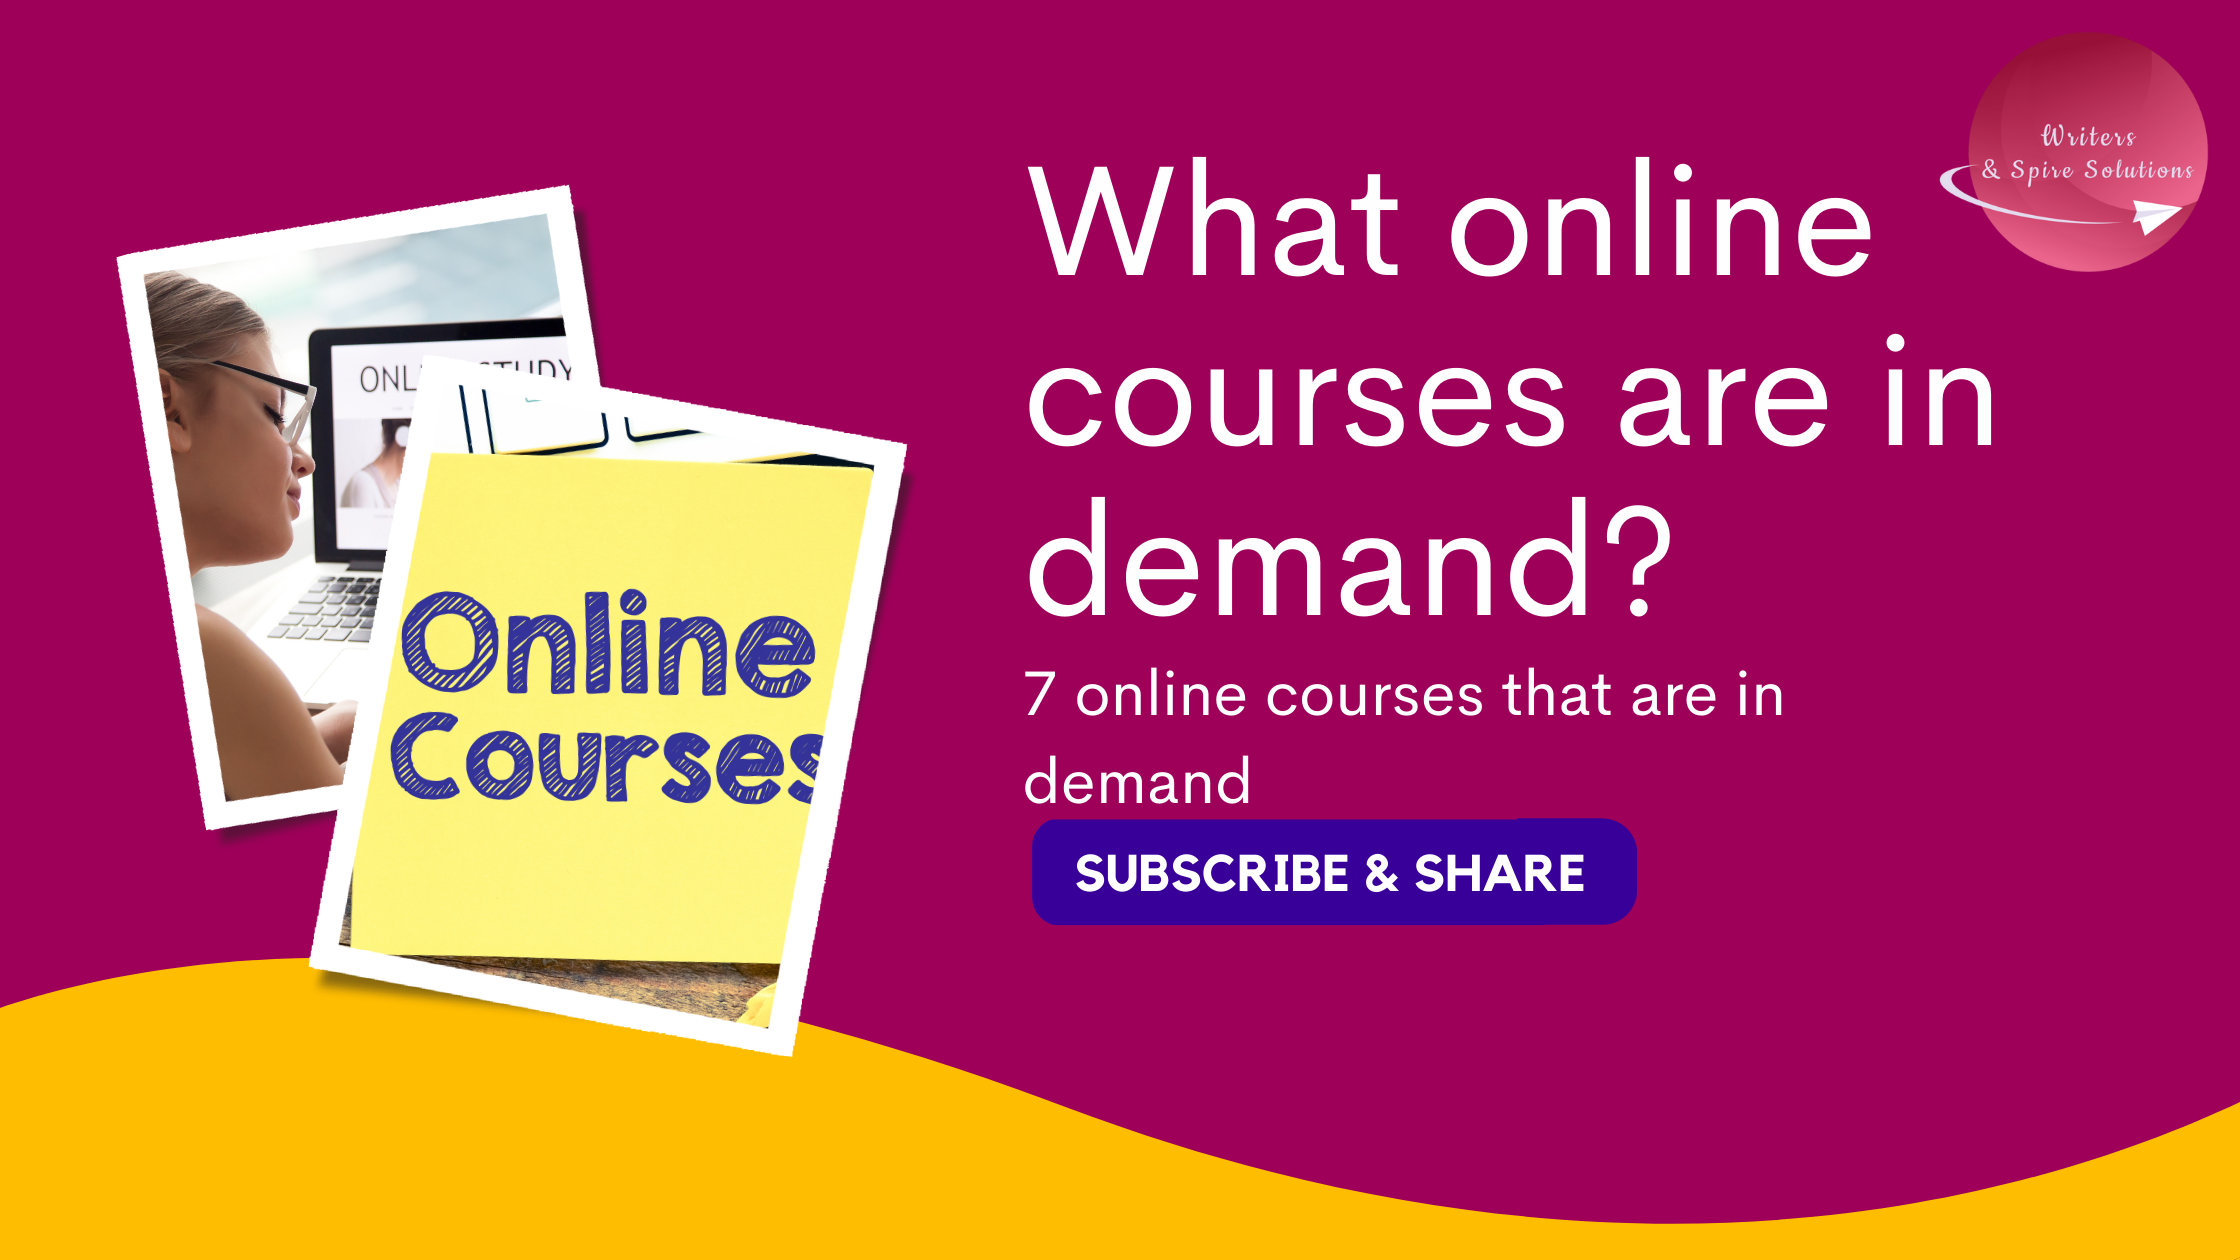 What online courses are in demand?